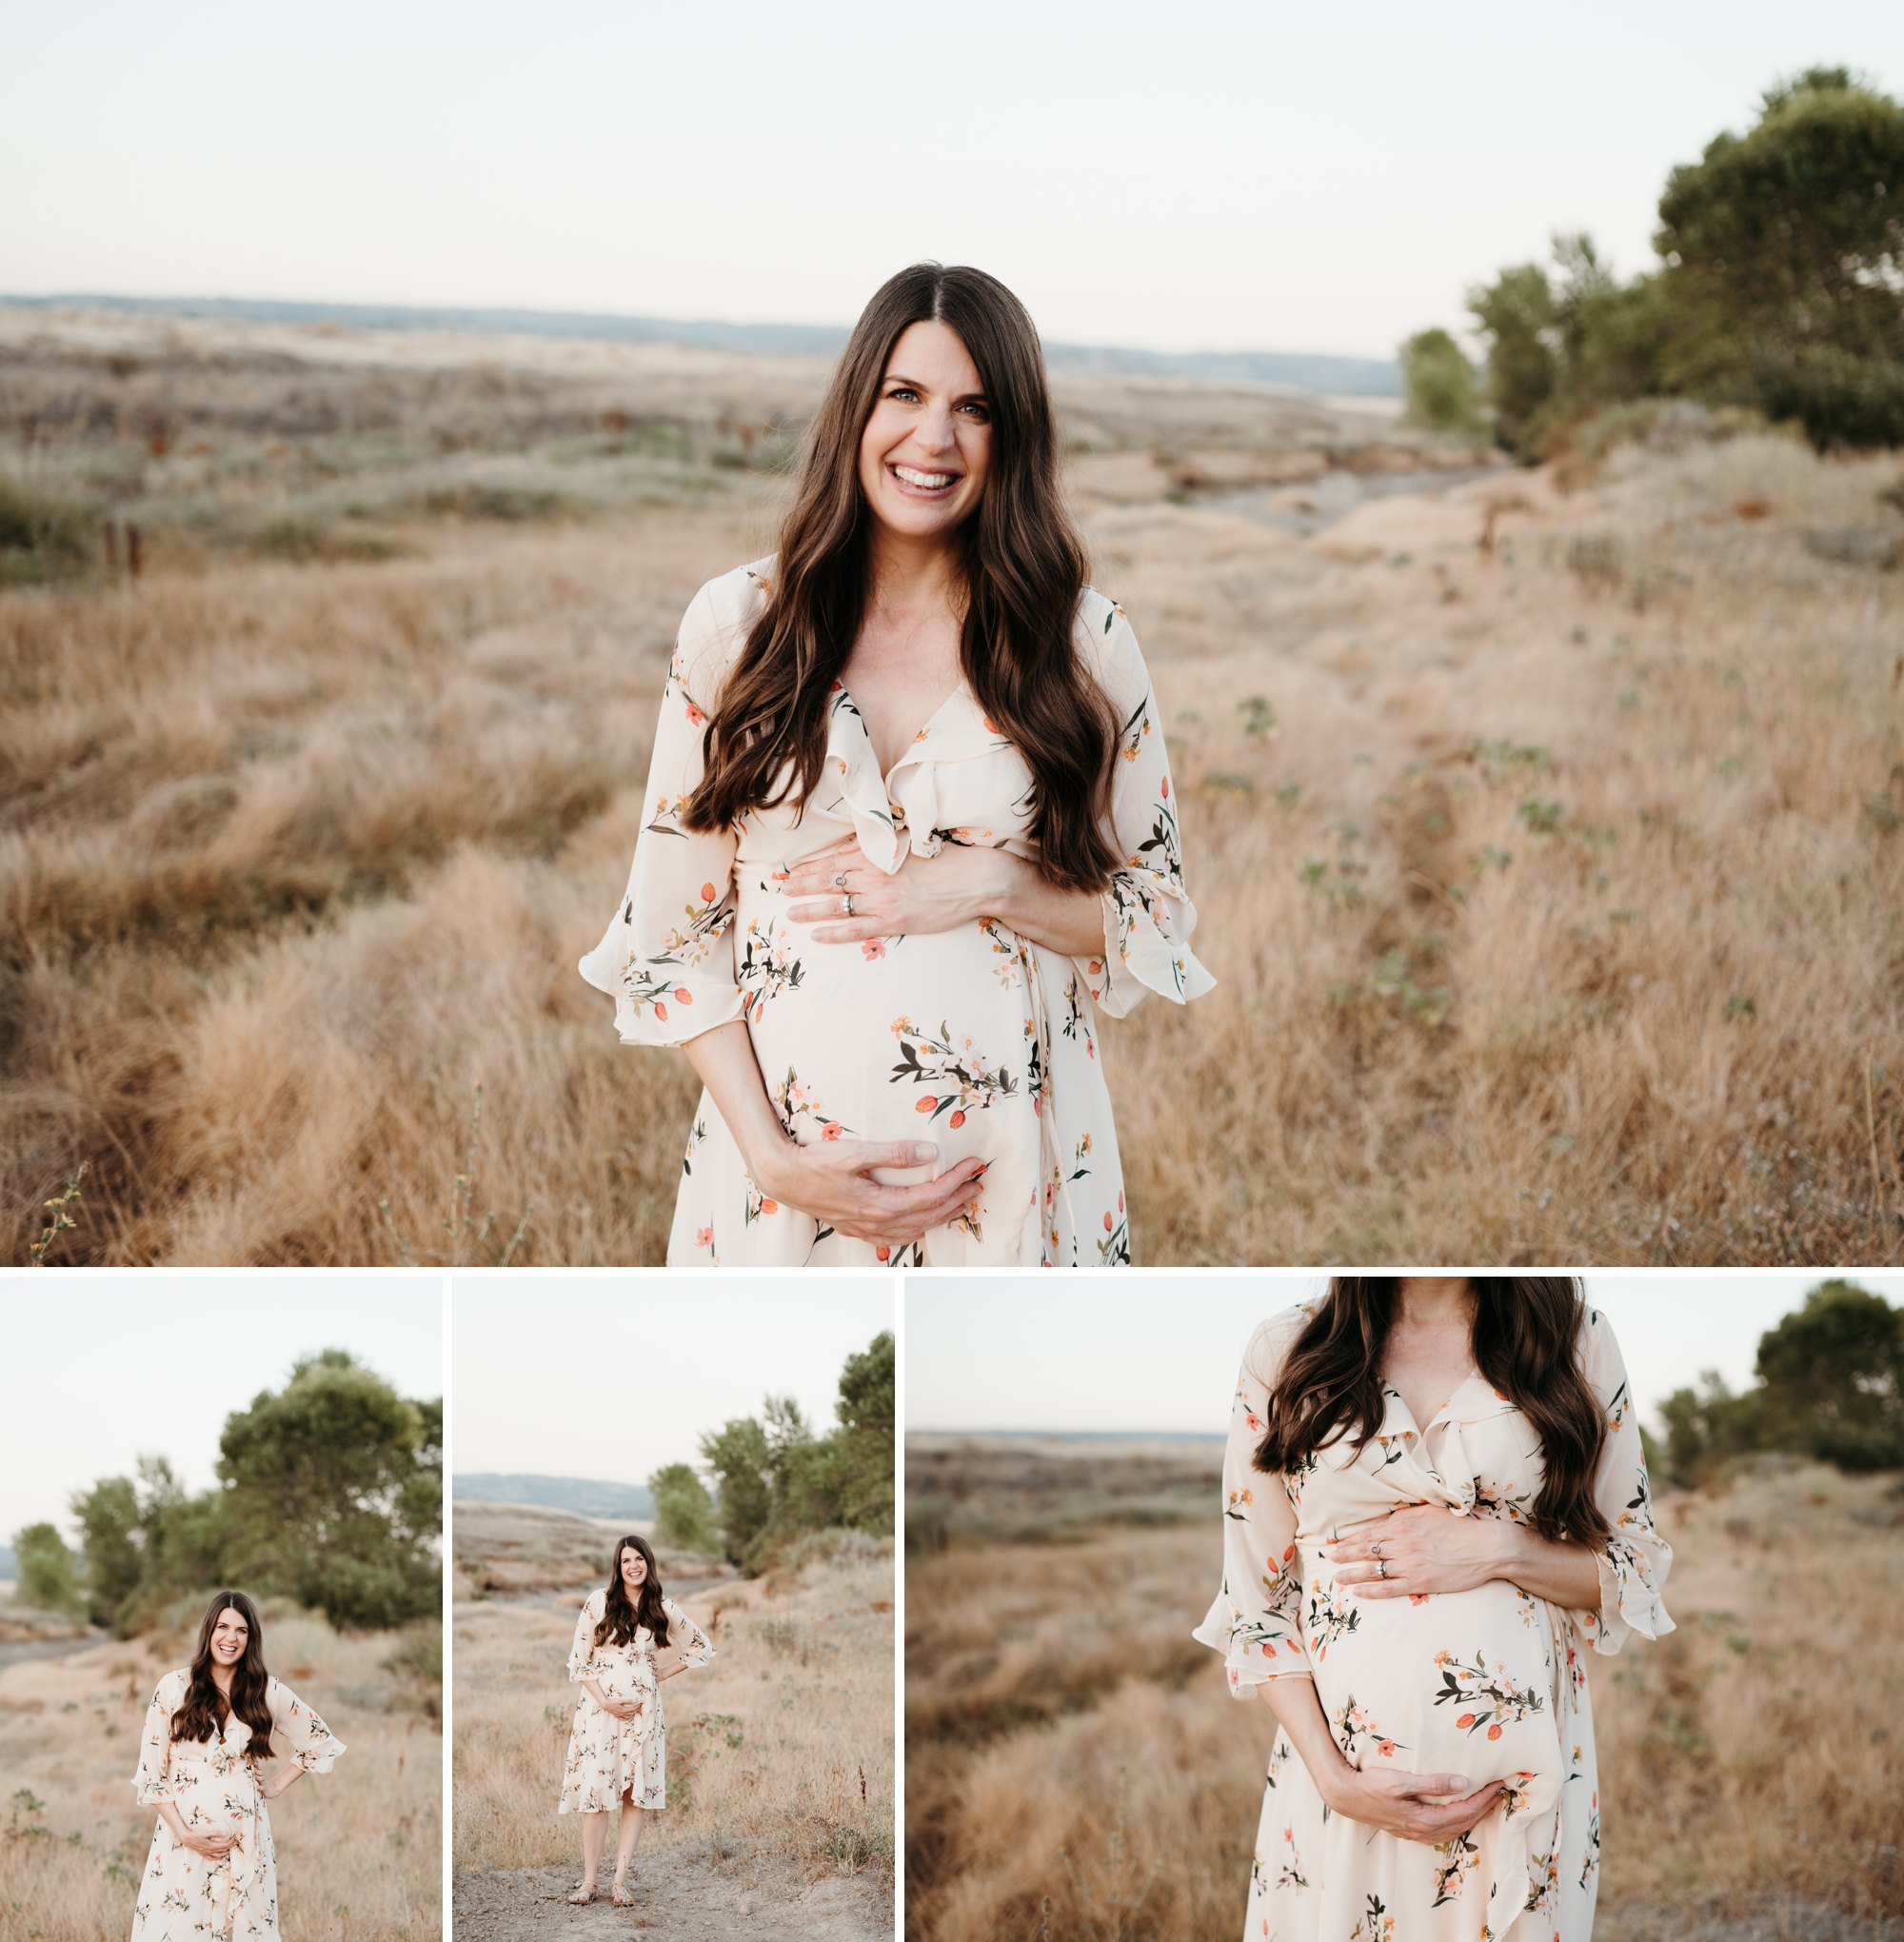 A glowing mom showing off her baby bump! California Maternity Session by Briana Morrison Photography